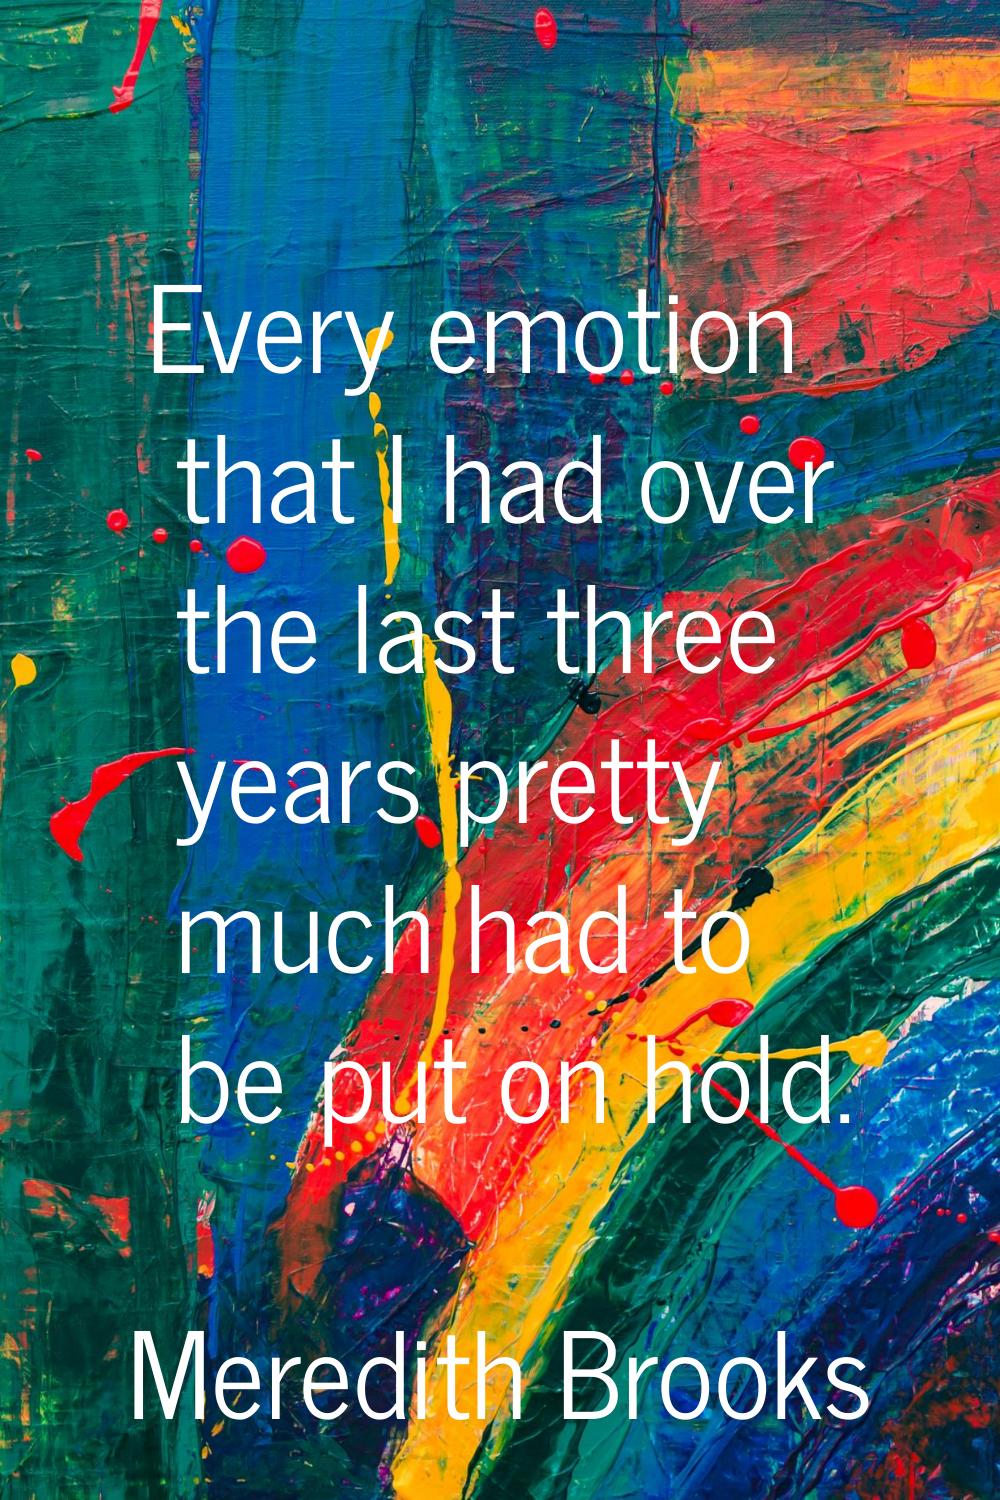 Every emotion that I had over the last three years pretty much had to be put on hold.